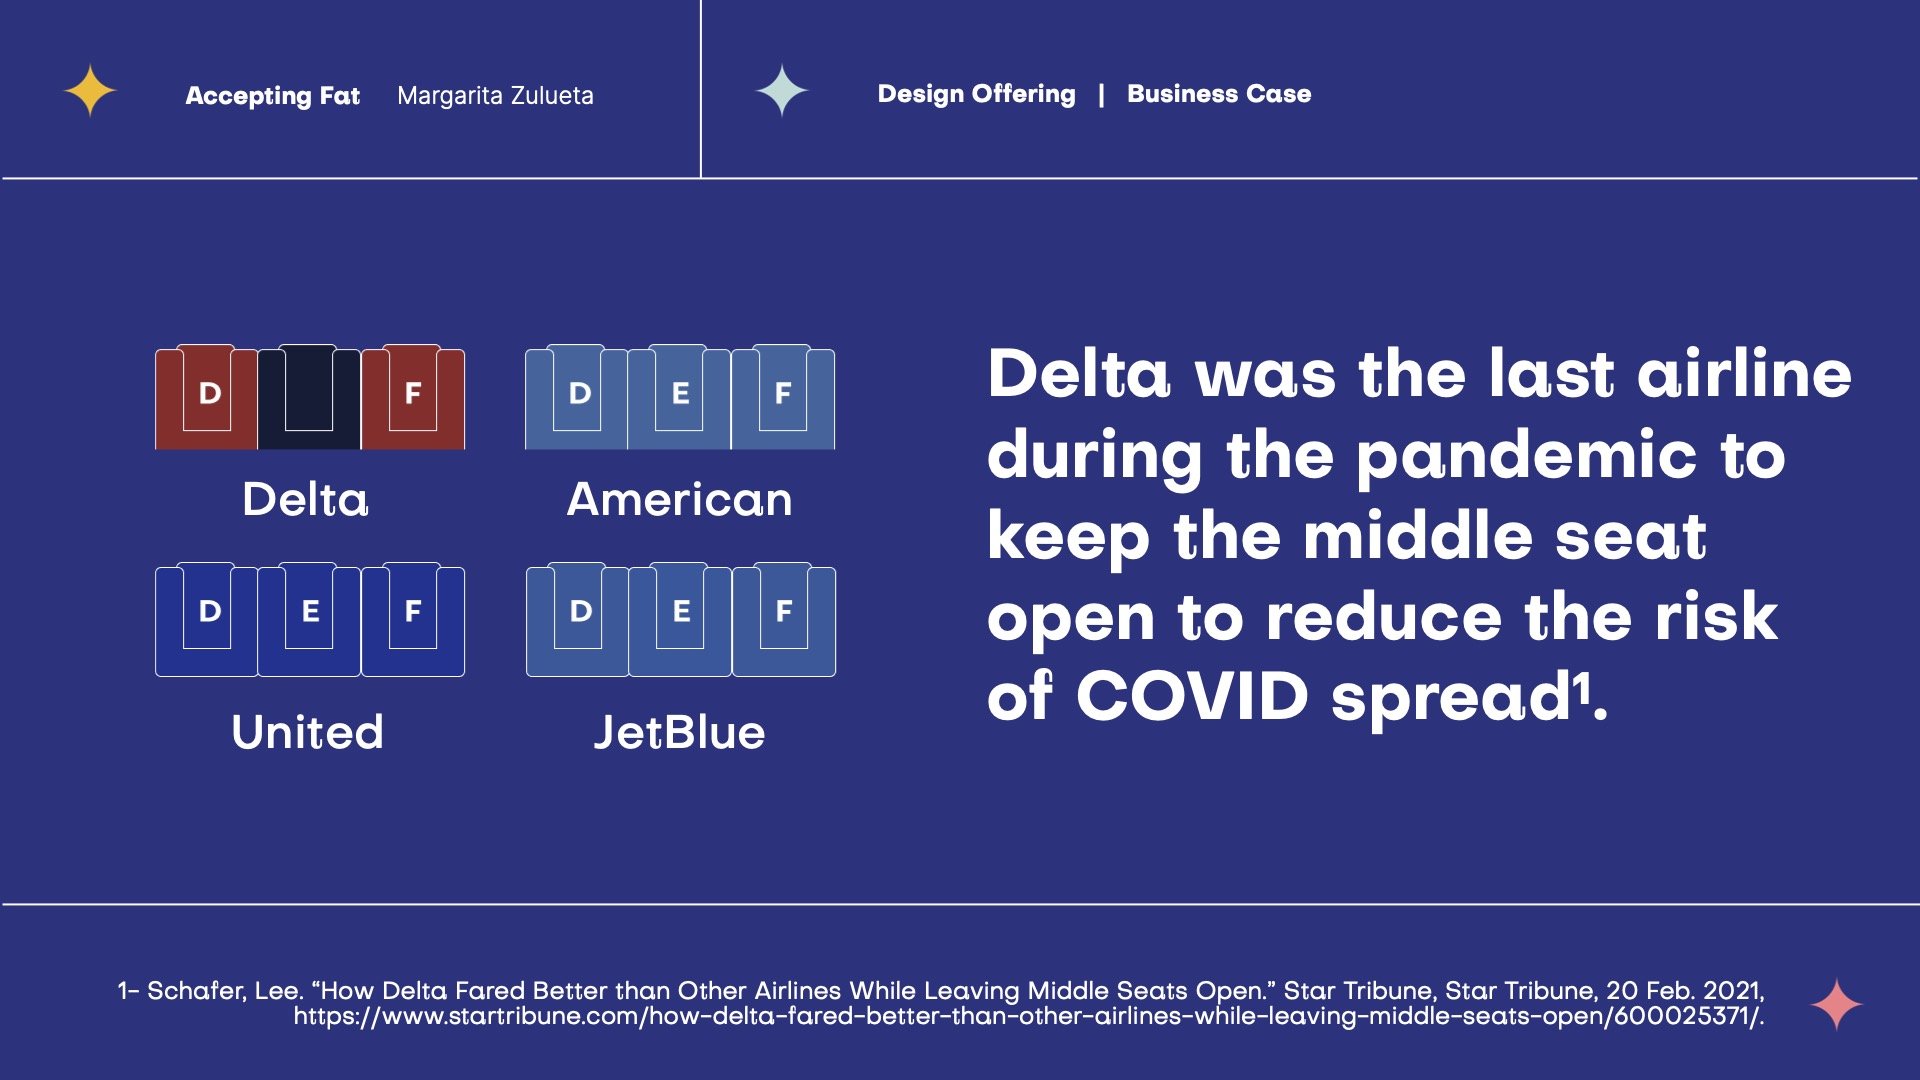  Margarita's business model research, using Delta as a case study 